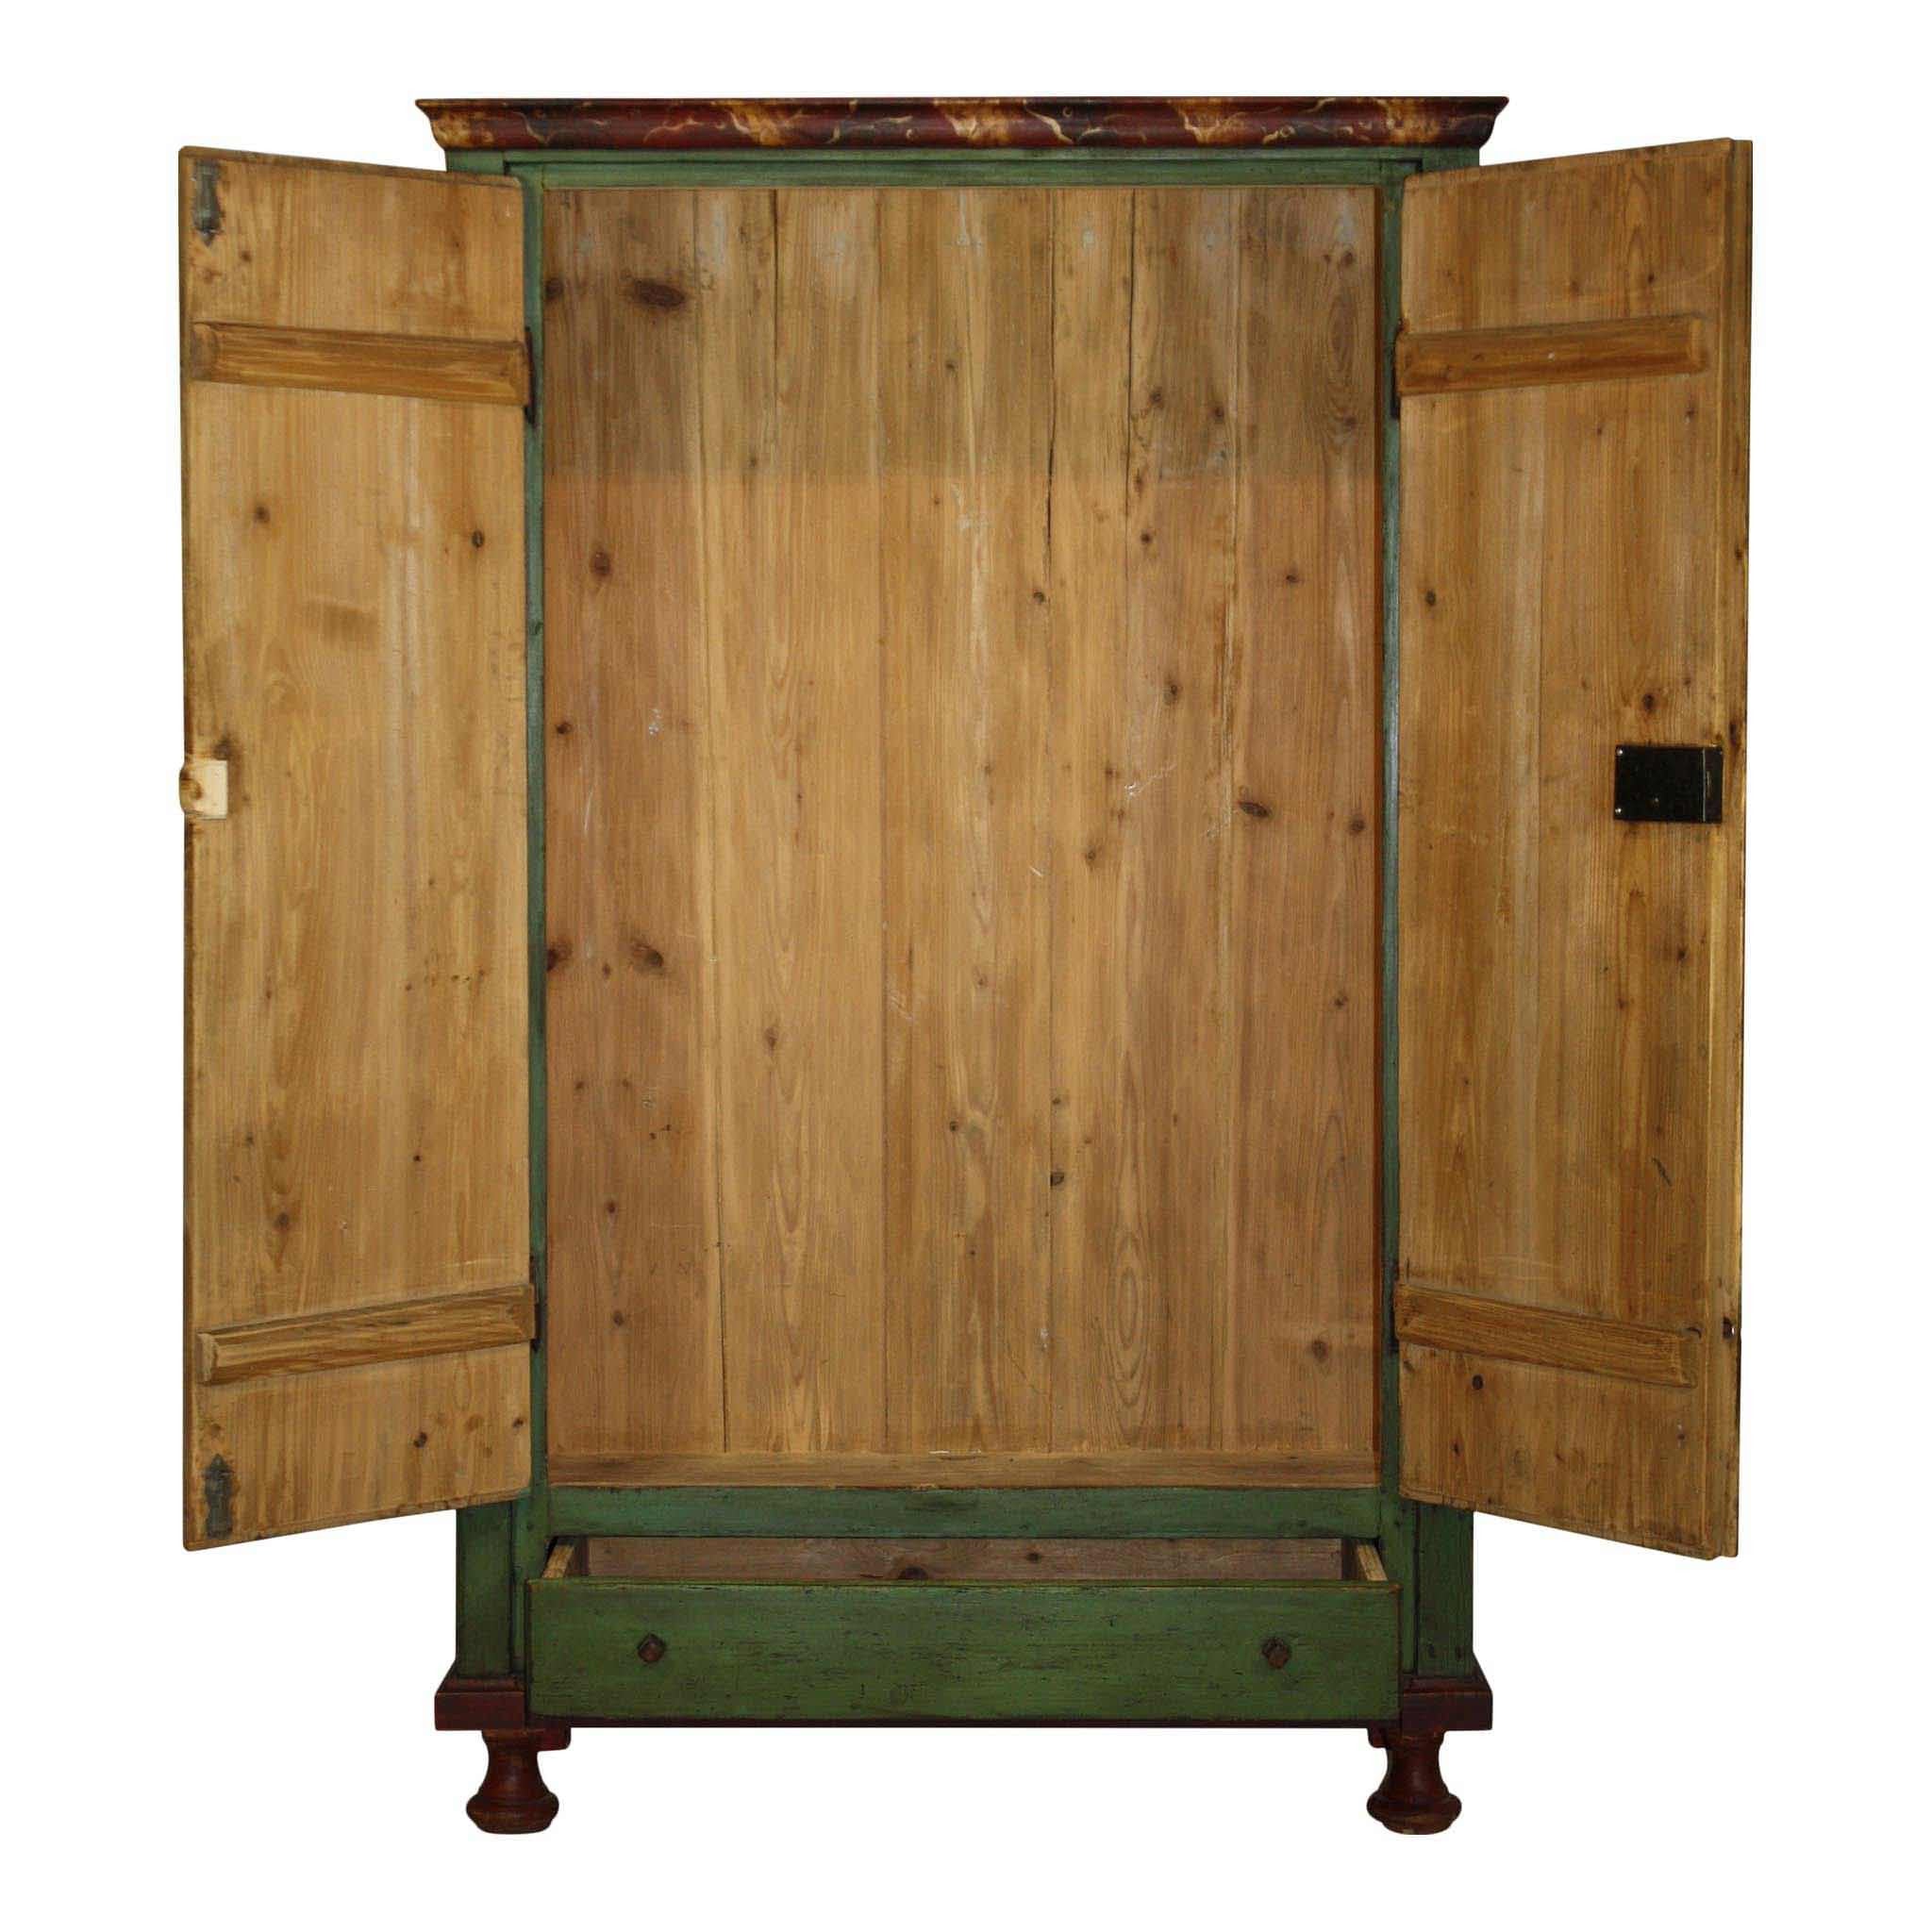 Painted Green Armoire